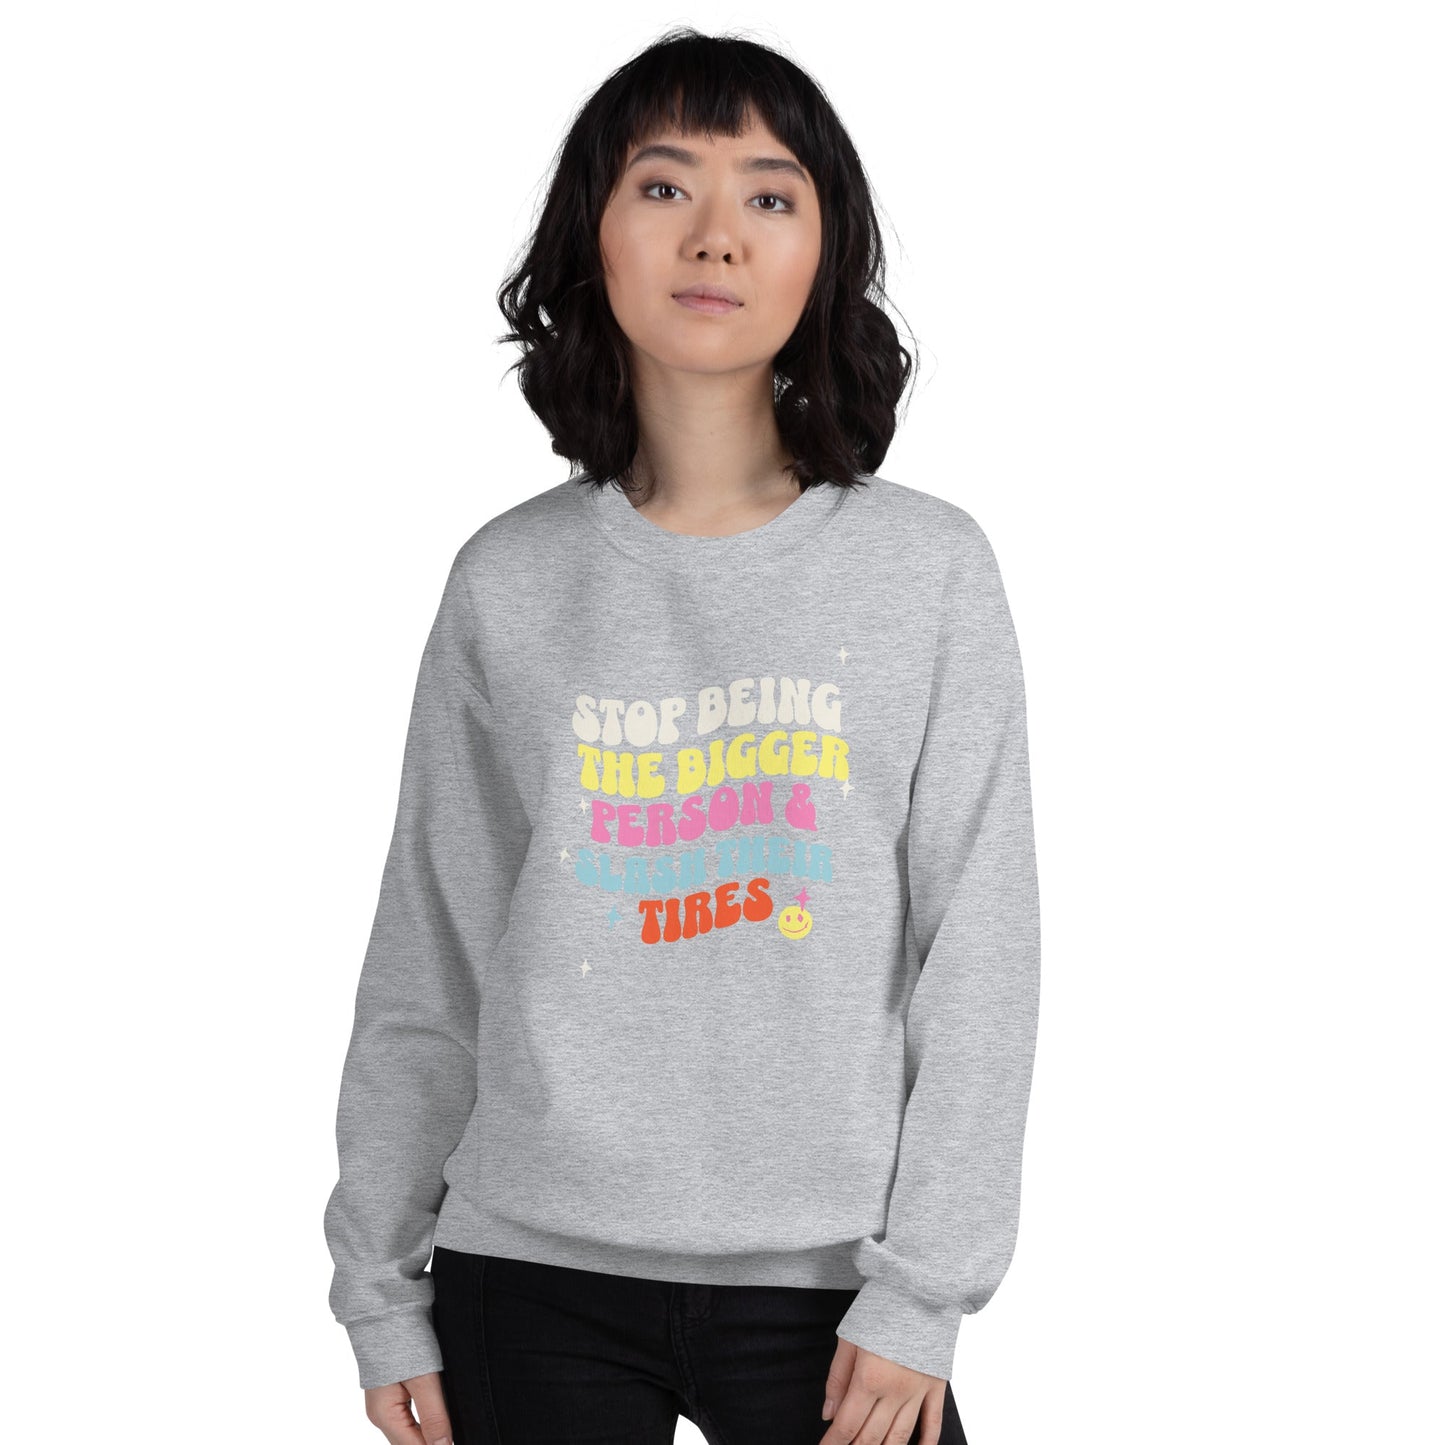 Load image into Gallery viewer, Stop Being the Bigger Person and Slash Their Tires Unisex Sweatshirt-Sweatshirt-Crimson and Clover Studio
